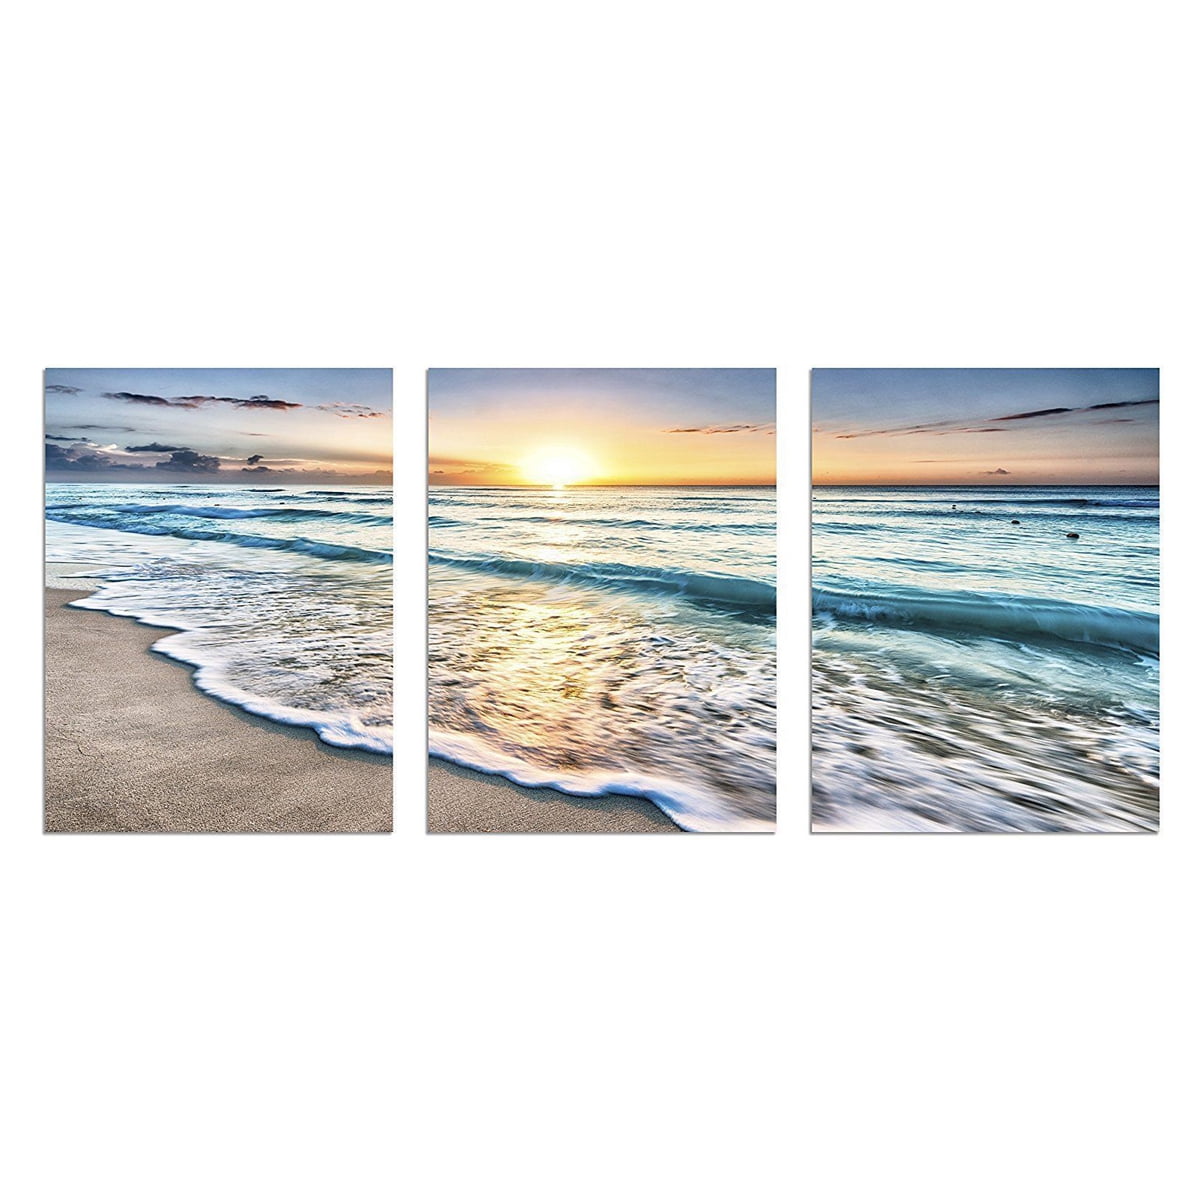 Wieco Art 3 Piece Giclee Canvas Prints Wall Art Ocean Beach Pictures Paintings for Living Room Bedroom Home Office Decorations Bridge Under Sunset Modern Stretched and Framed Blue Landscape Artwork LEPAC7993